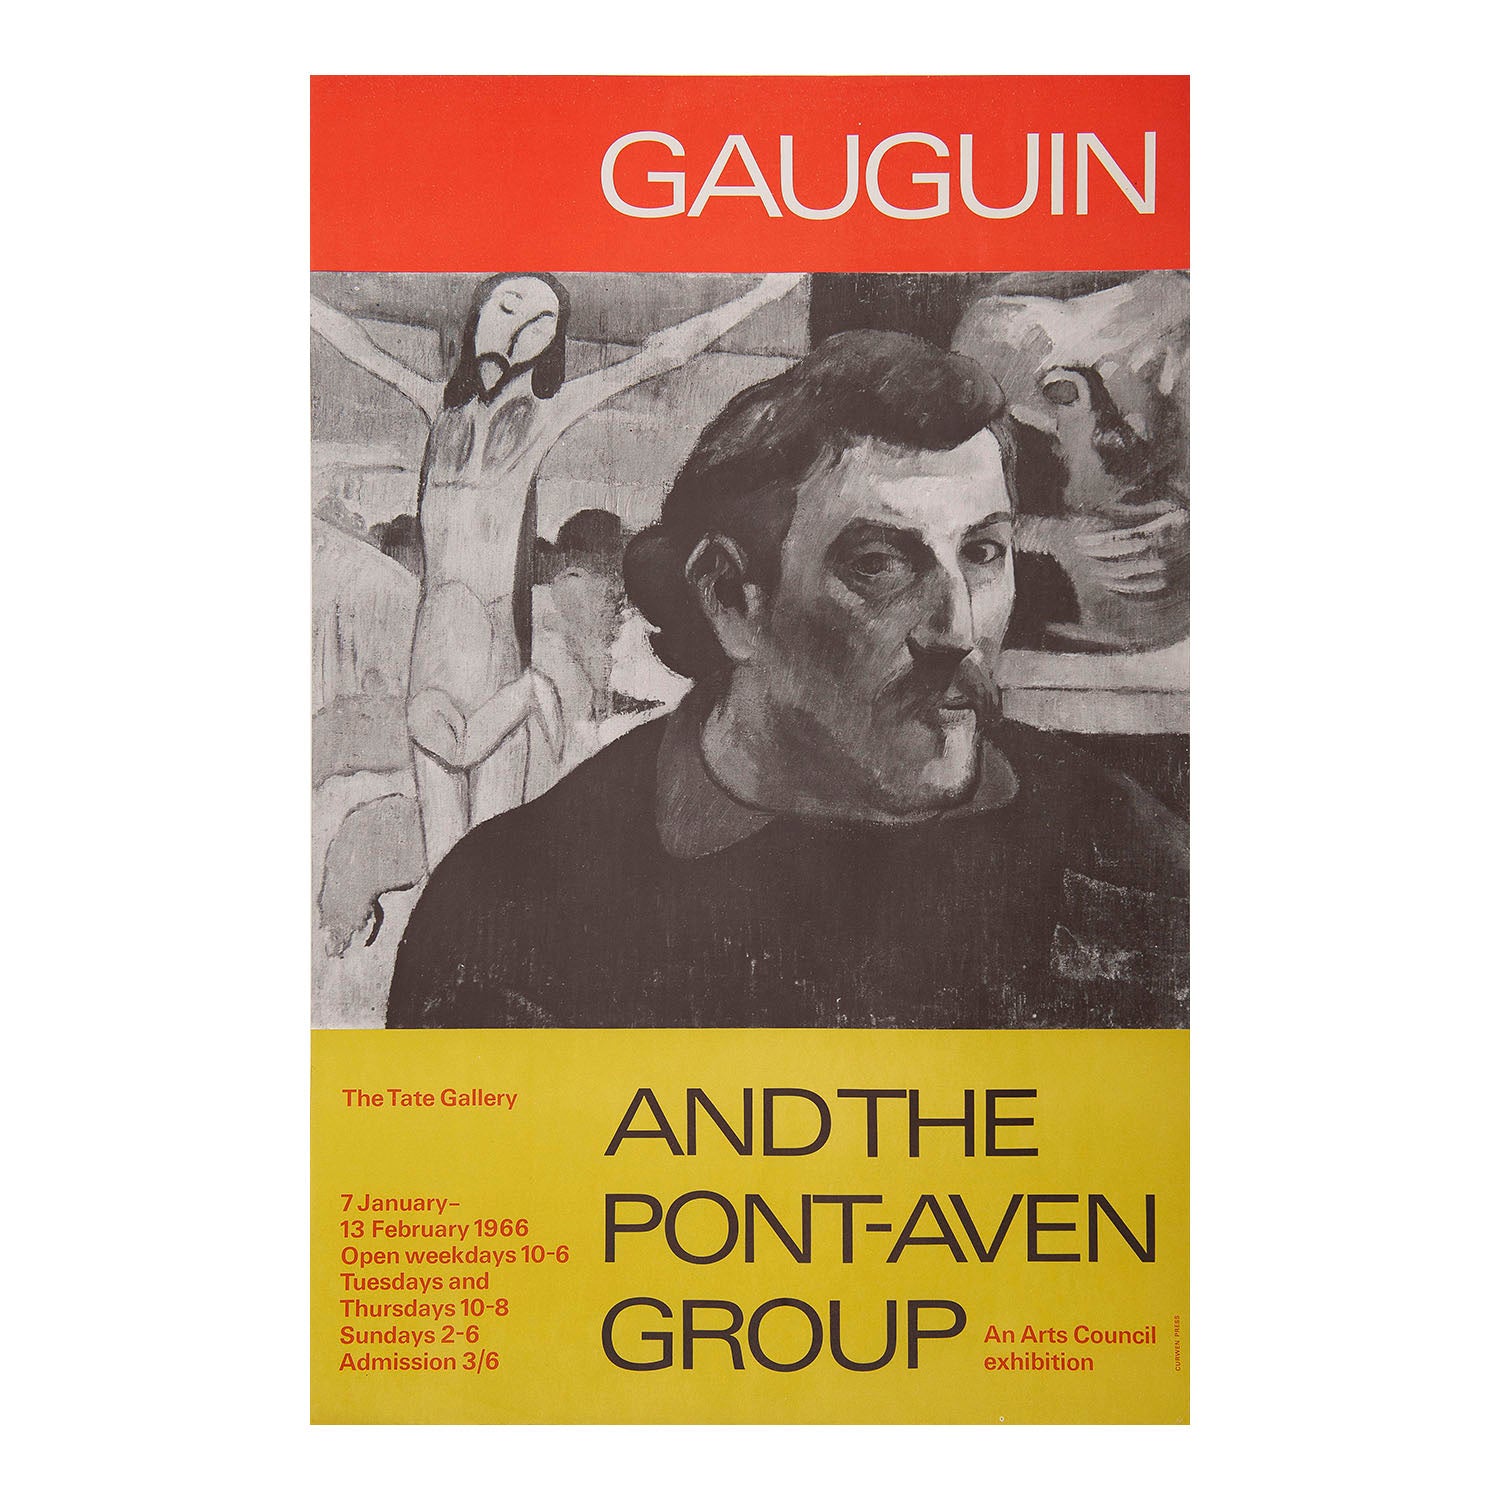 exhibition poster, Gauguin and the Pont-Aven Group, The Tate, 1966. The design, printed by the Curwen Press, features Paul Gauguin’s Self-Portrait with the Yellow Christ (1890 or 1891)